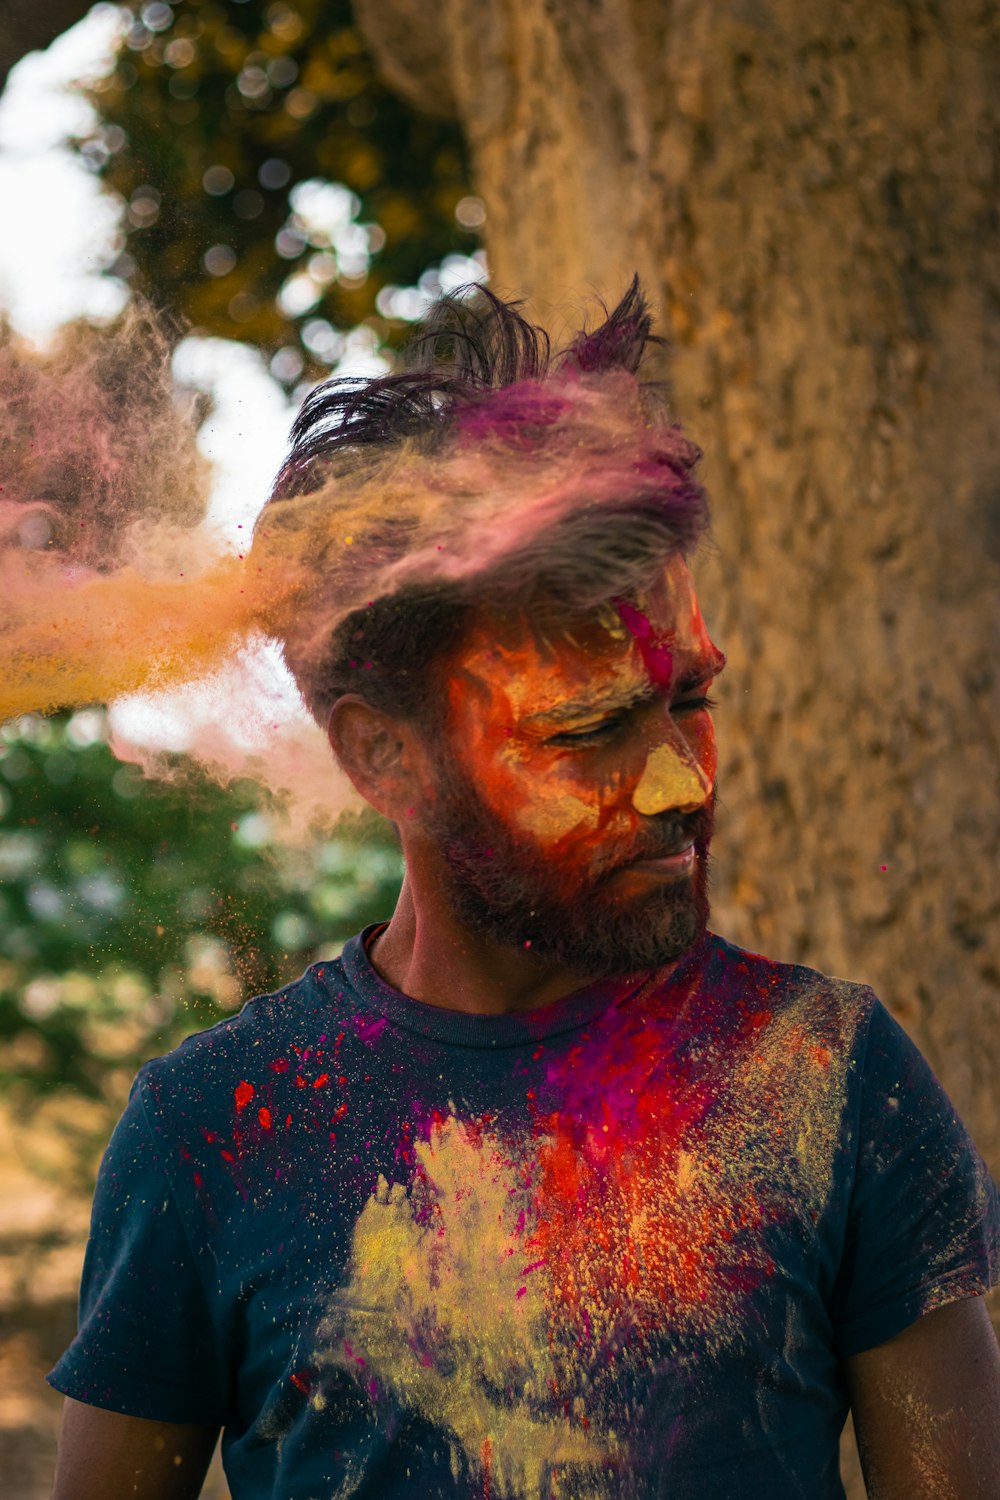 a man covered in colored powder with trees in the background